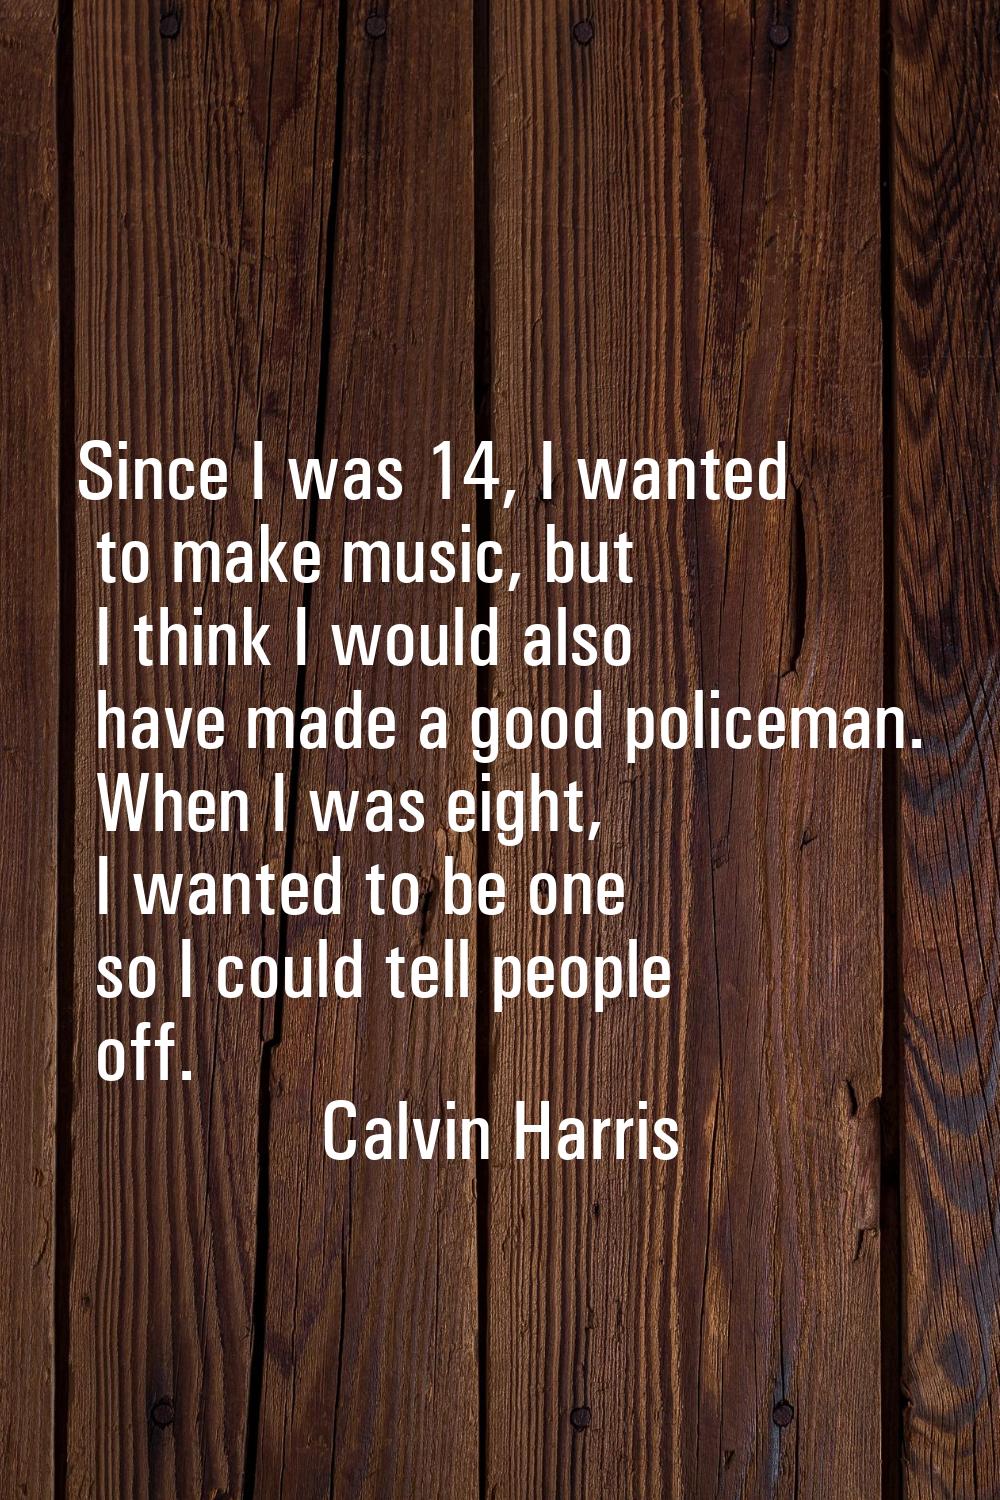 Since I was 14, I wanted to make music, but I think I would also have made a good policeman. When I